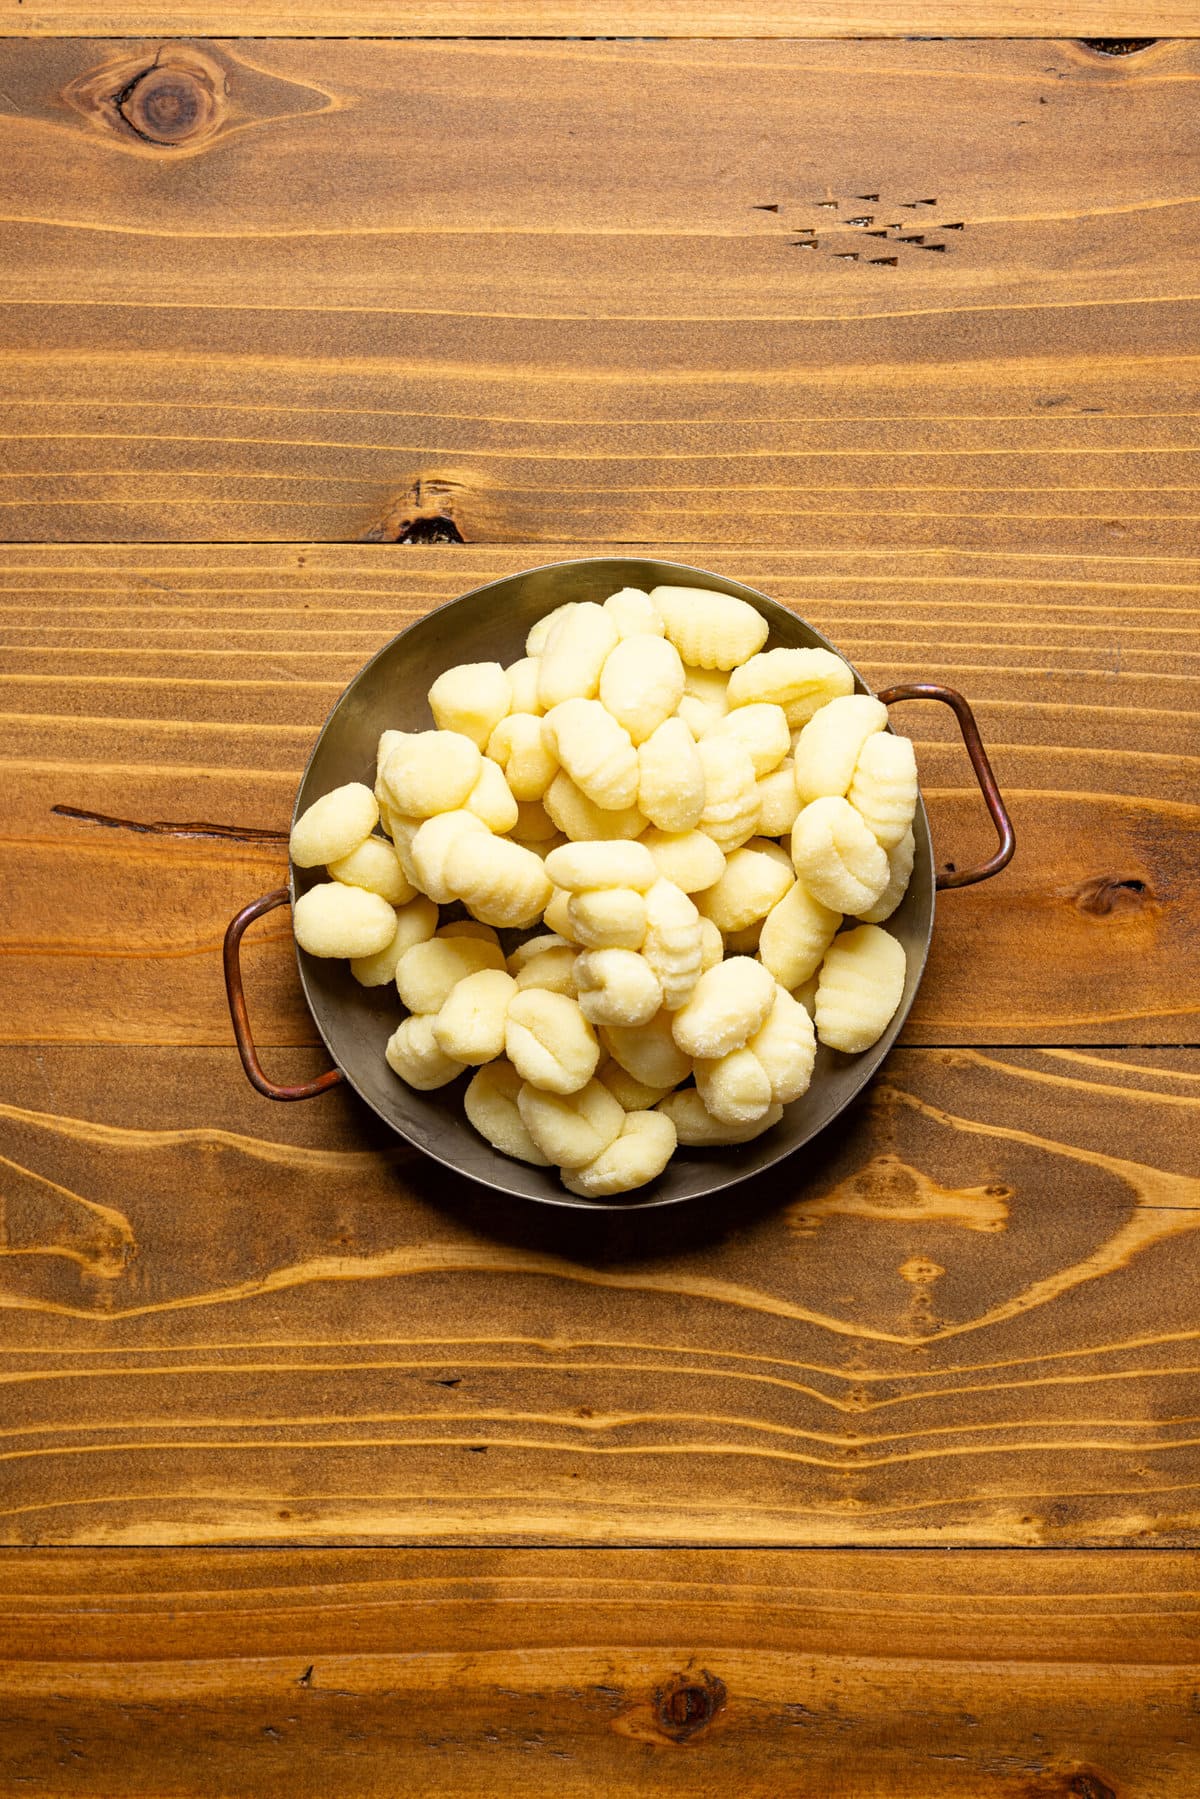 Gnocchi in a bowl on a brown wood table.